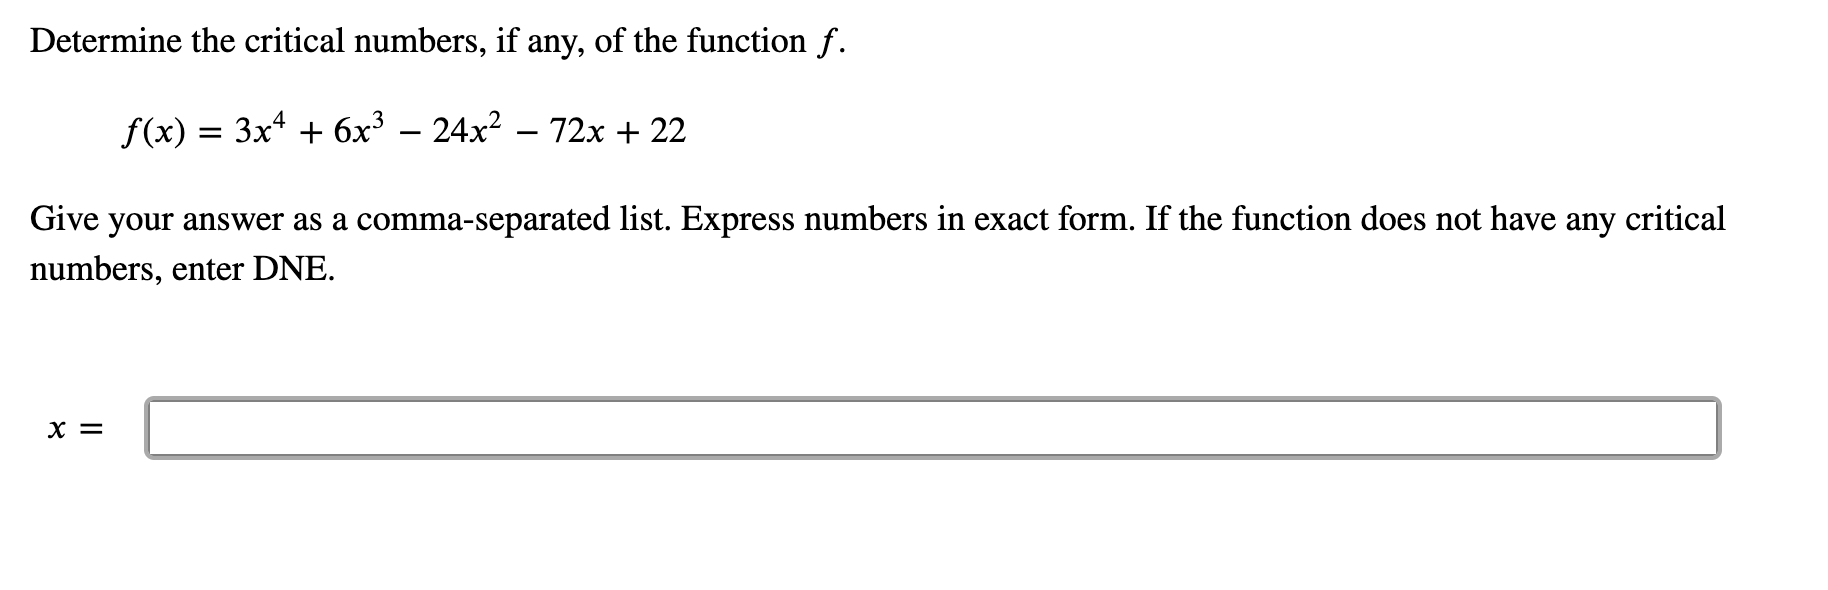 Determine the critical numbers, if any, of the function f.
f(x) = 3x* + 6x³ – 24x? – 72x + 22
